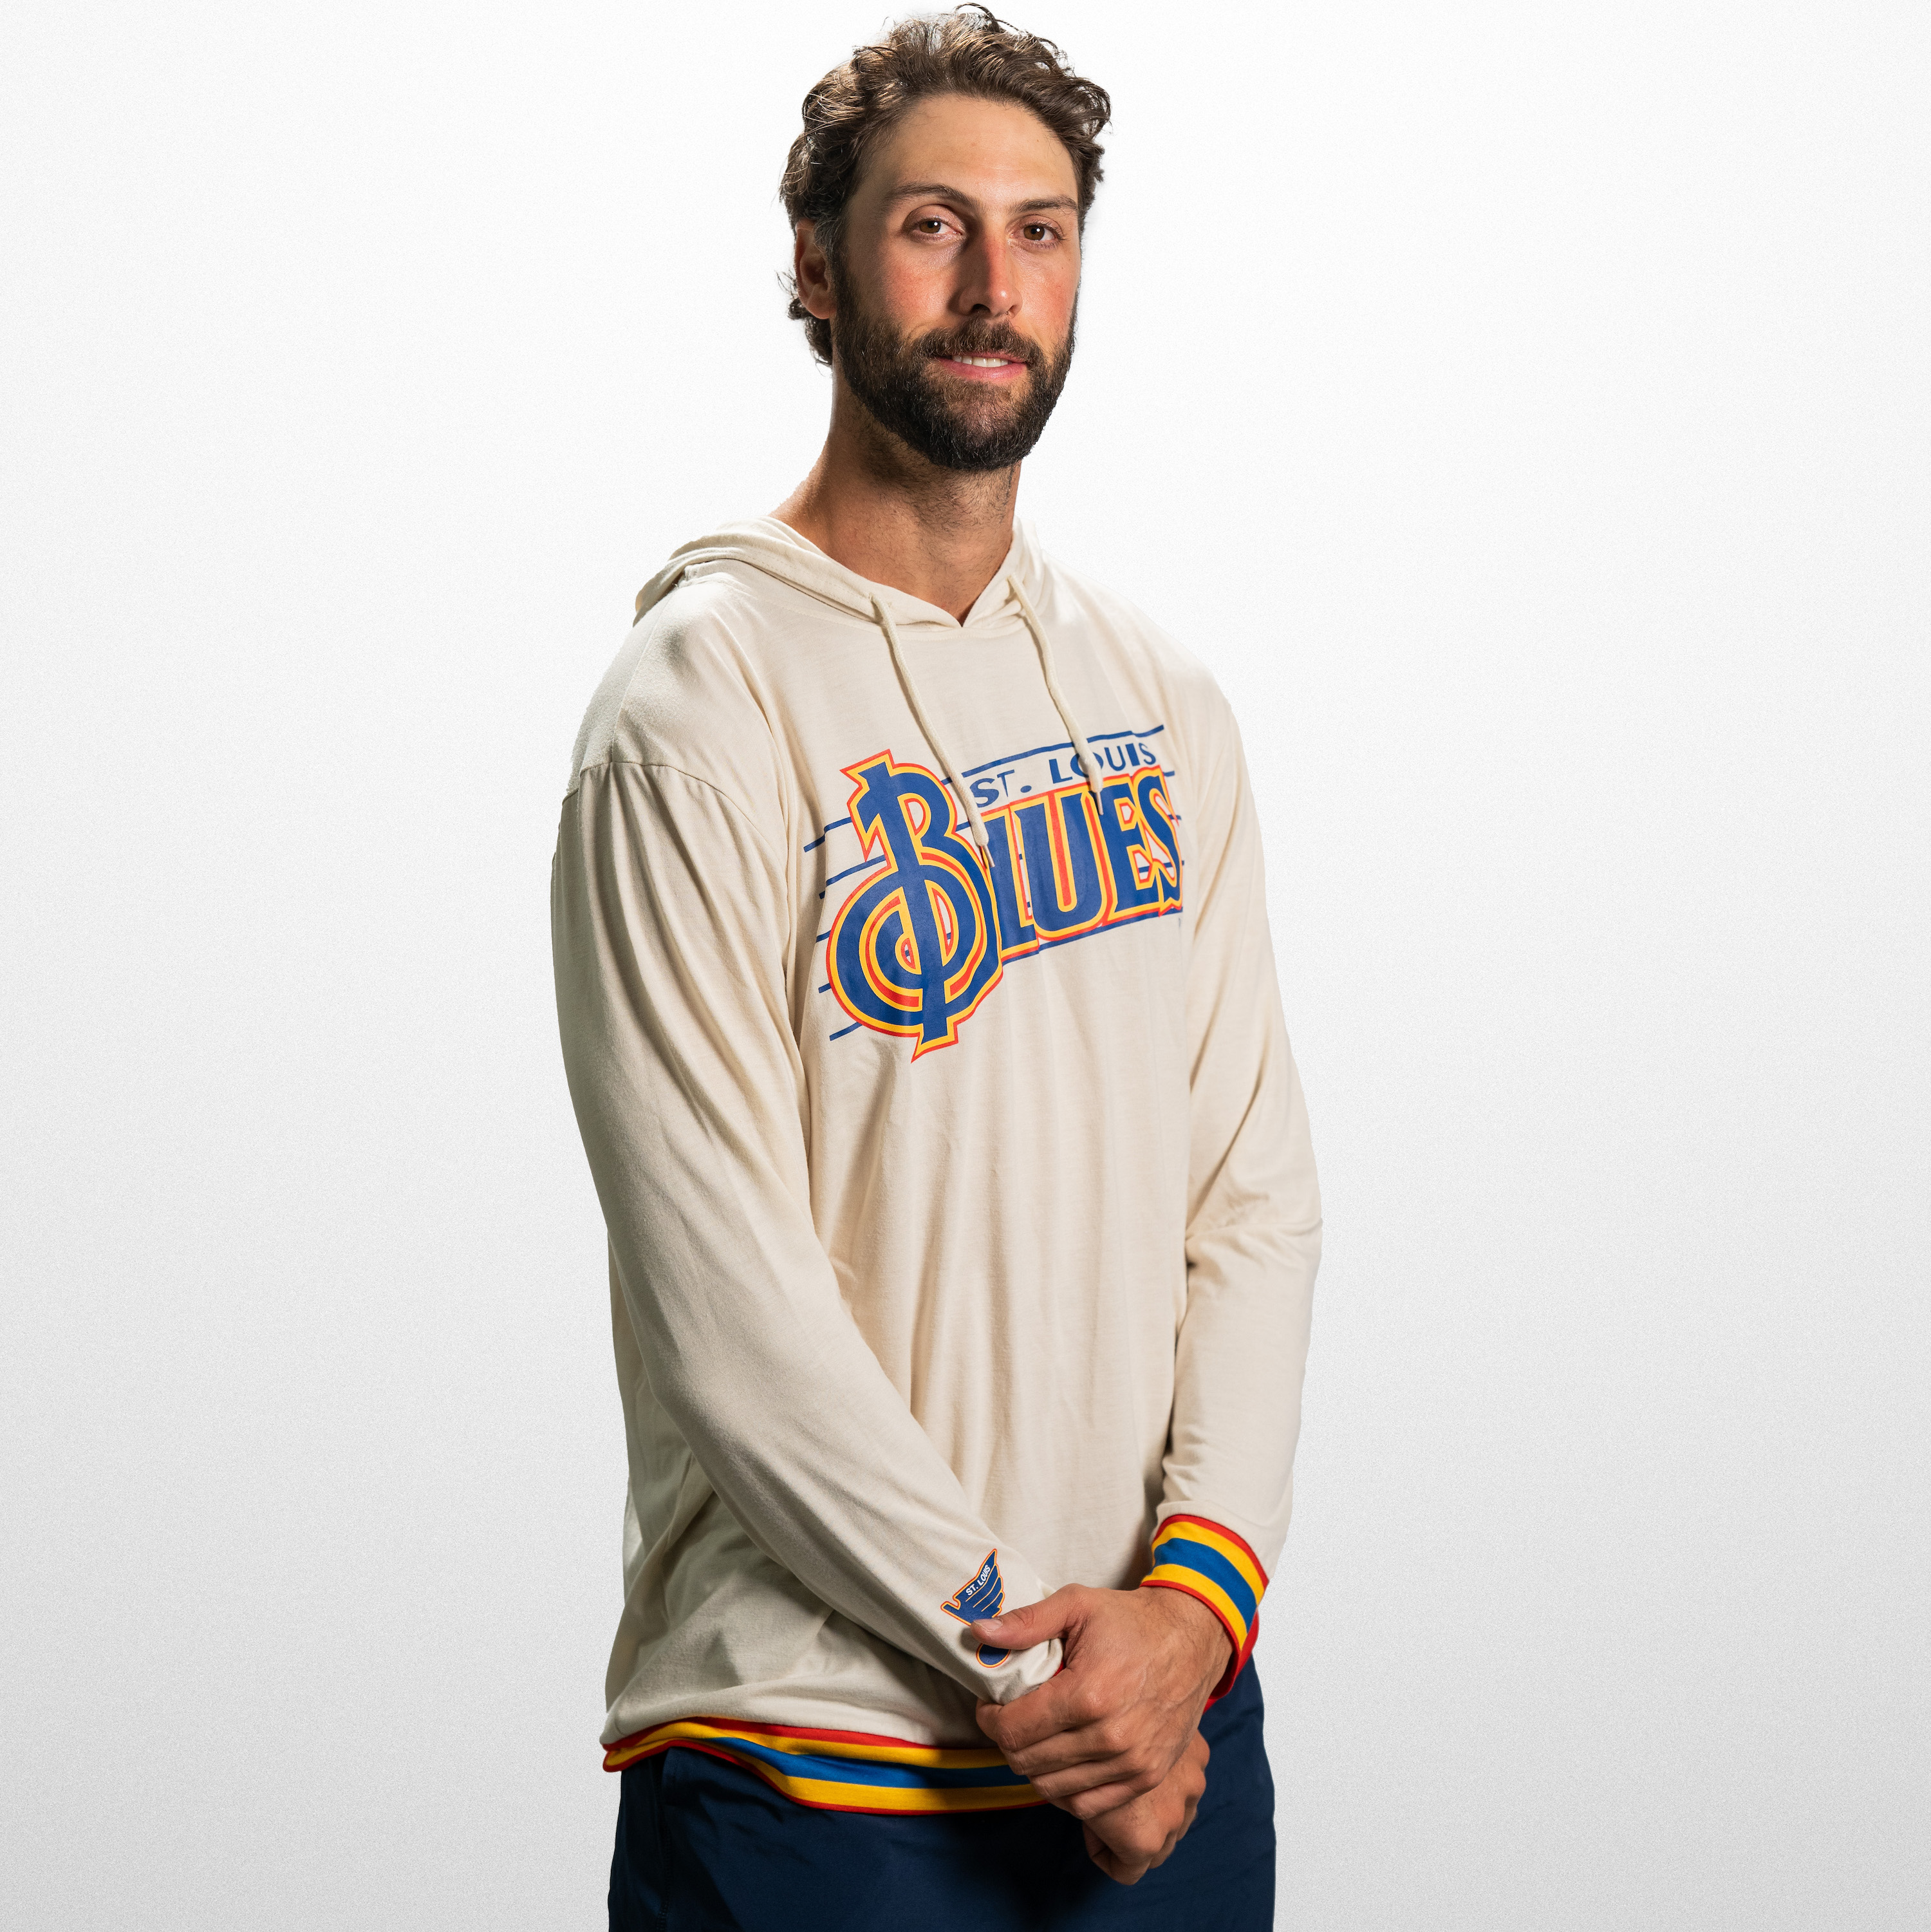 St. Louis Blues on X: Looking good, Borts! The first 12,000 fans through  the doors Nov. 7 when the Blues host the Jets will receive this Retro Long-Sleeve  T-Shirt Hoodie, courtesy of @